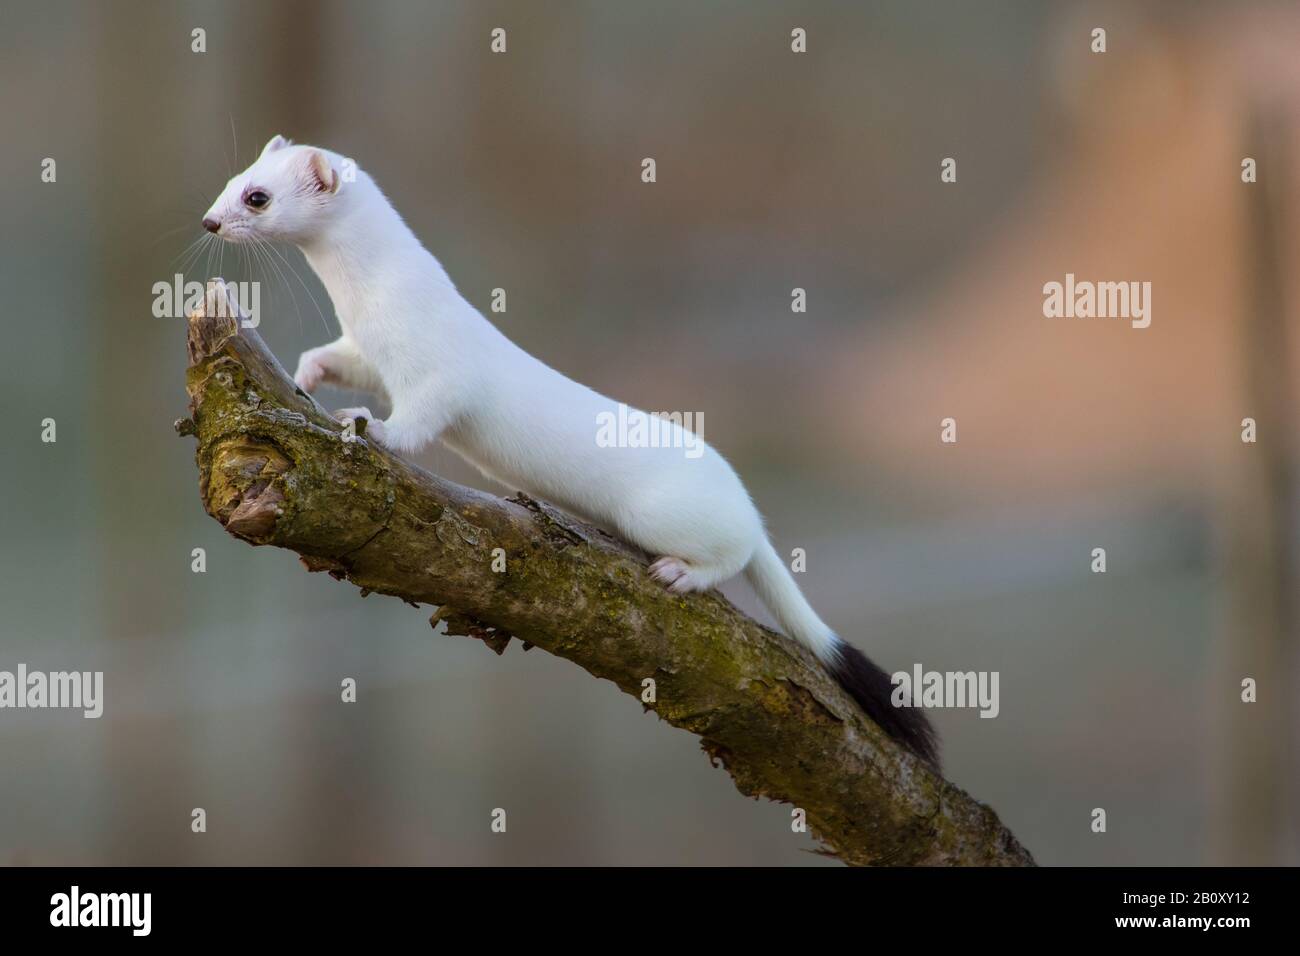 Ermine, Stoat, Short-tailed weasel (Mustela erminea), climbs on a branch in  winter fur and watching, side view, Switzerland, Sankt Gallen Stock Photo -  Alamy